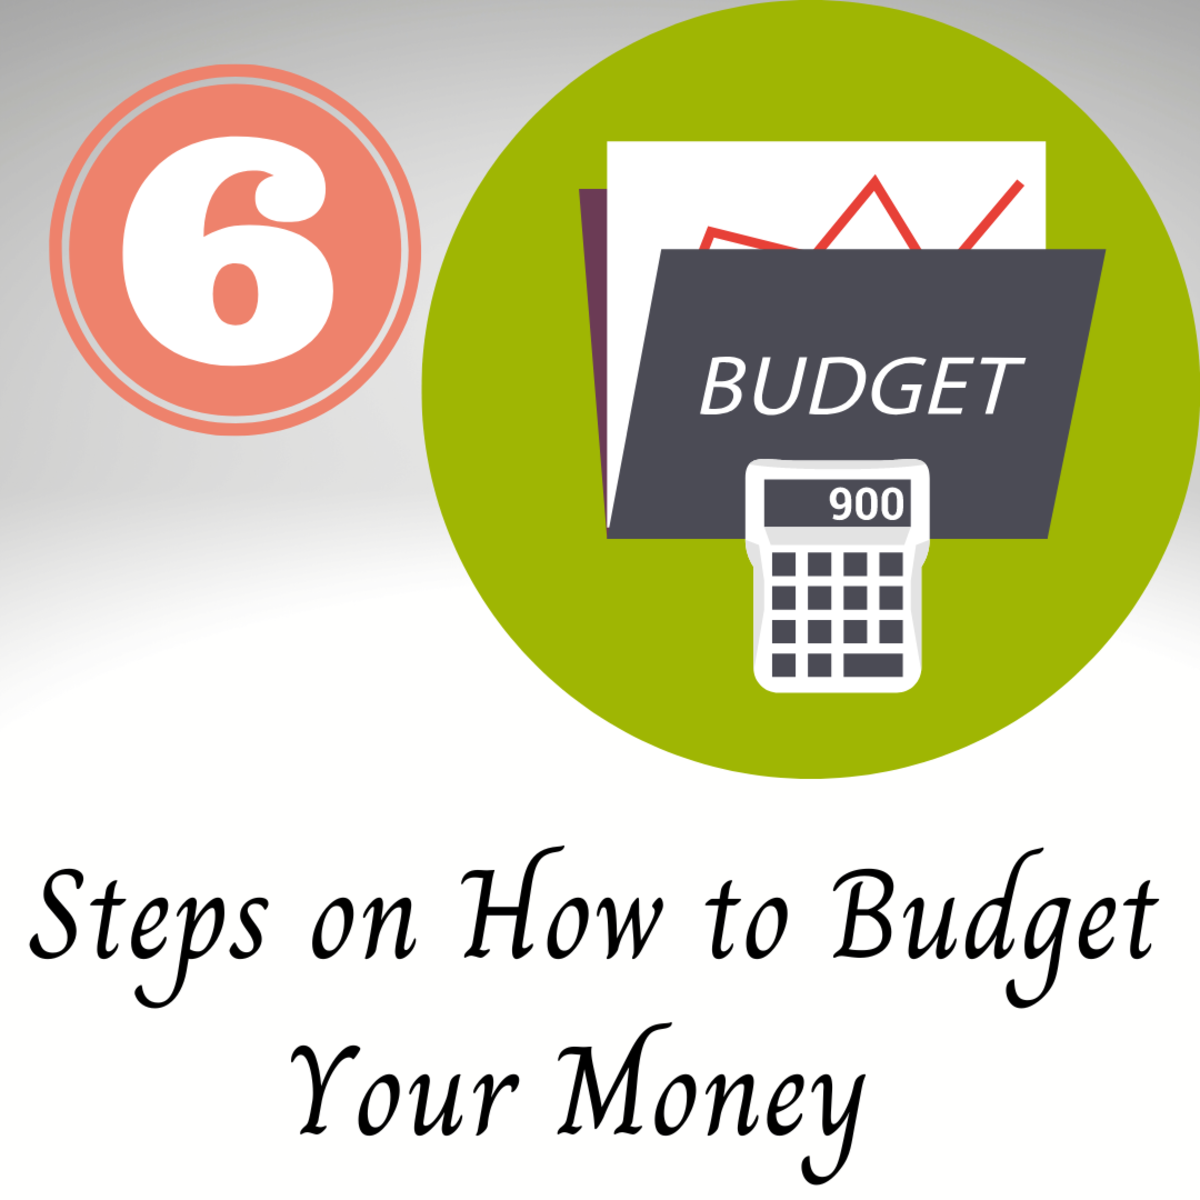 6 Steps on How to Budget Your Money For Beginners